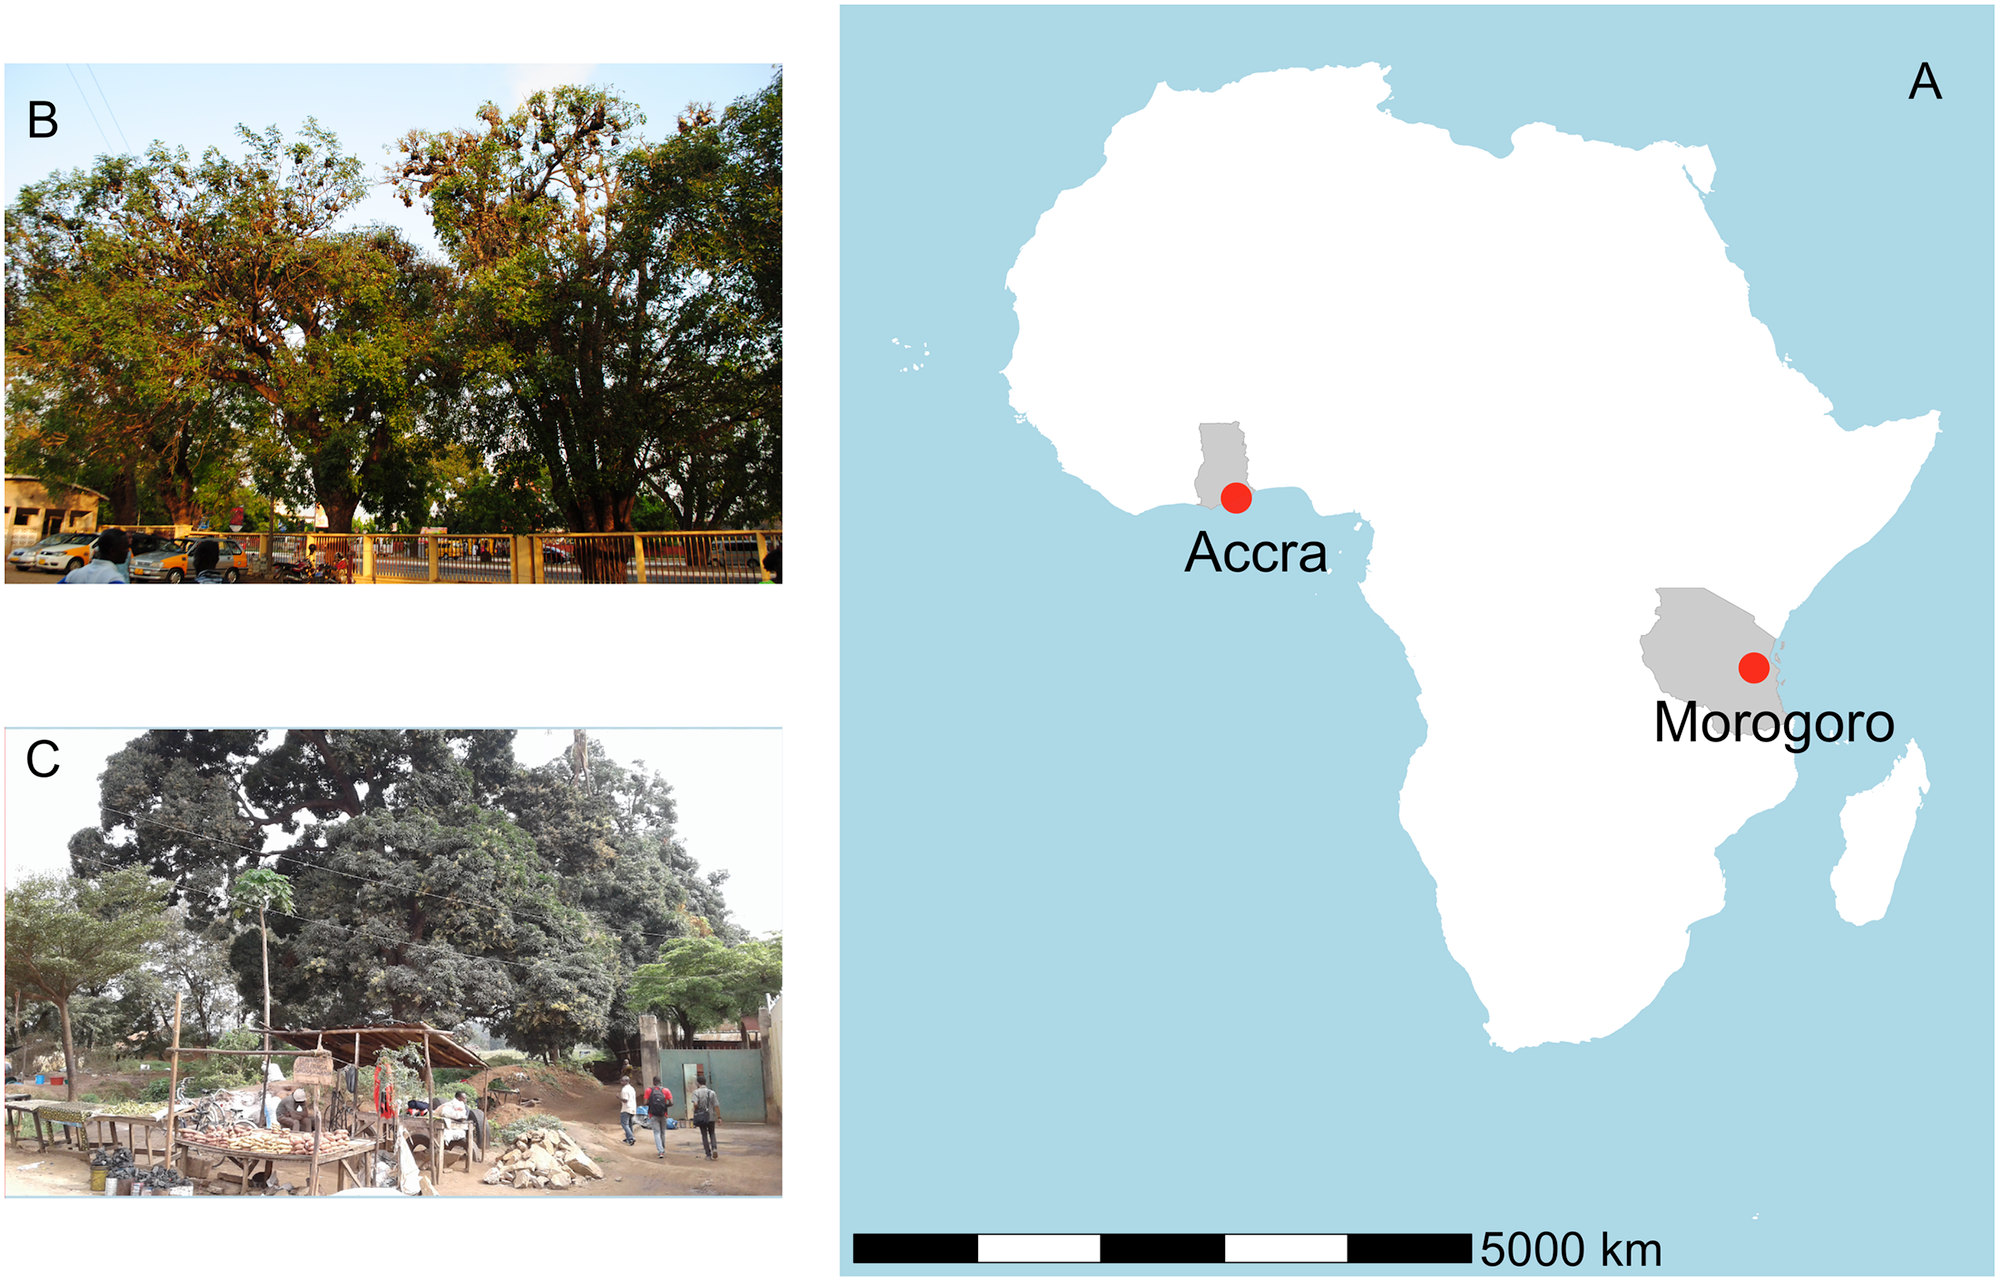 Panel A shows the locations of the roosts in Africa. Panel B shows some of the trees occupied at the 37 Military Hospital in Accra, Ghana and Panel C shows roosting bats at the Kikundi Market in Morogoro, Tanzania.